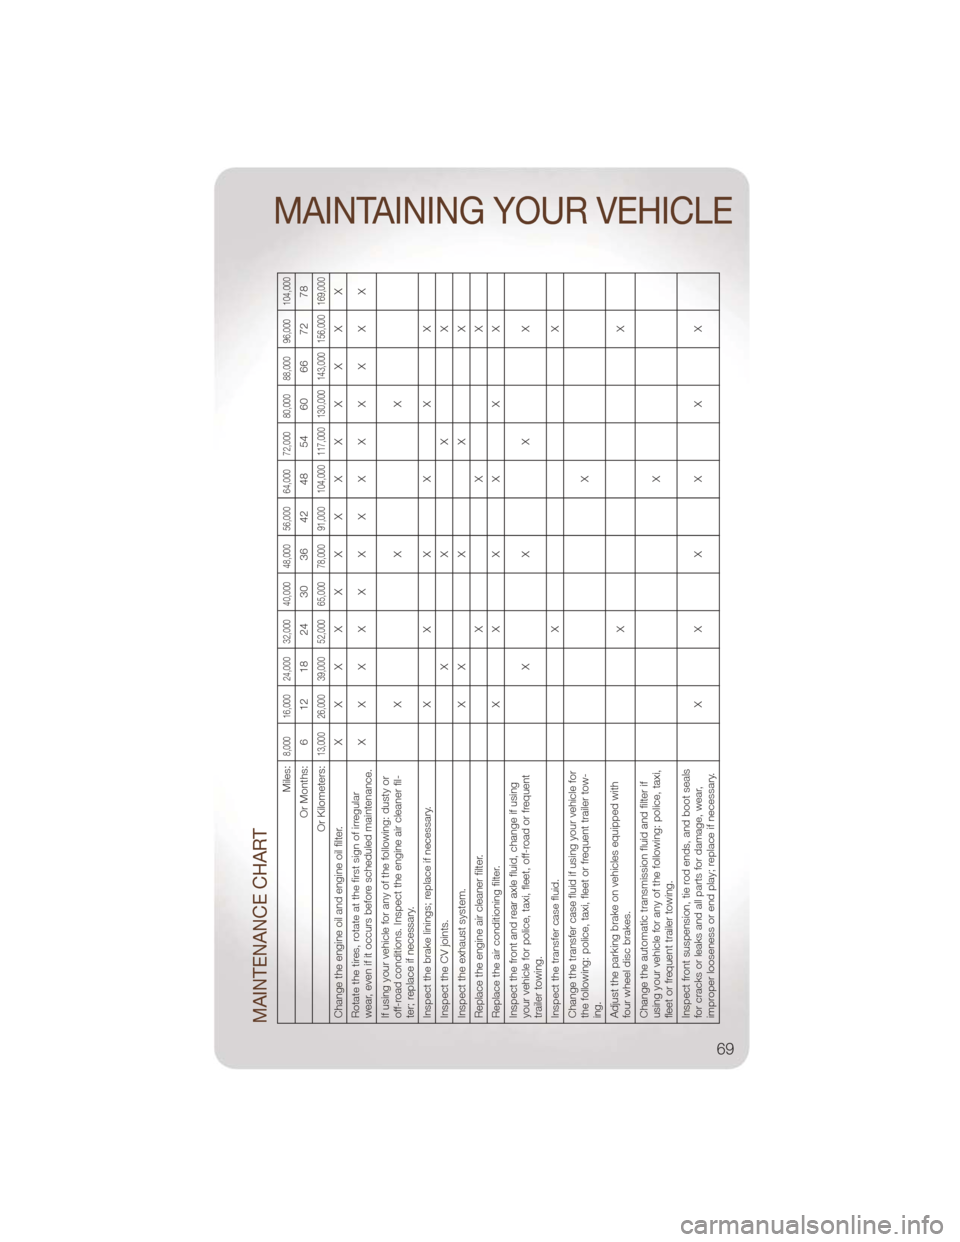 JEEP LIBERTY 2011 KK / 2.G User Guide MAINTENANCE CHART
Miles:
8,000 16,000 24,000 32,000 40,000 48,000 56,000 64,000 72,000 80,000 88,000 96,000 104,000
Or Months: 6 12 18 24 30 36 42 48 54 60 66 72 78
Or Kilometers:
13,000 26,000 39,000